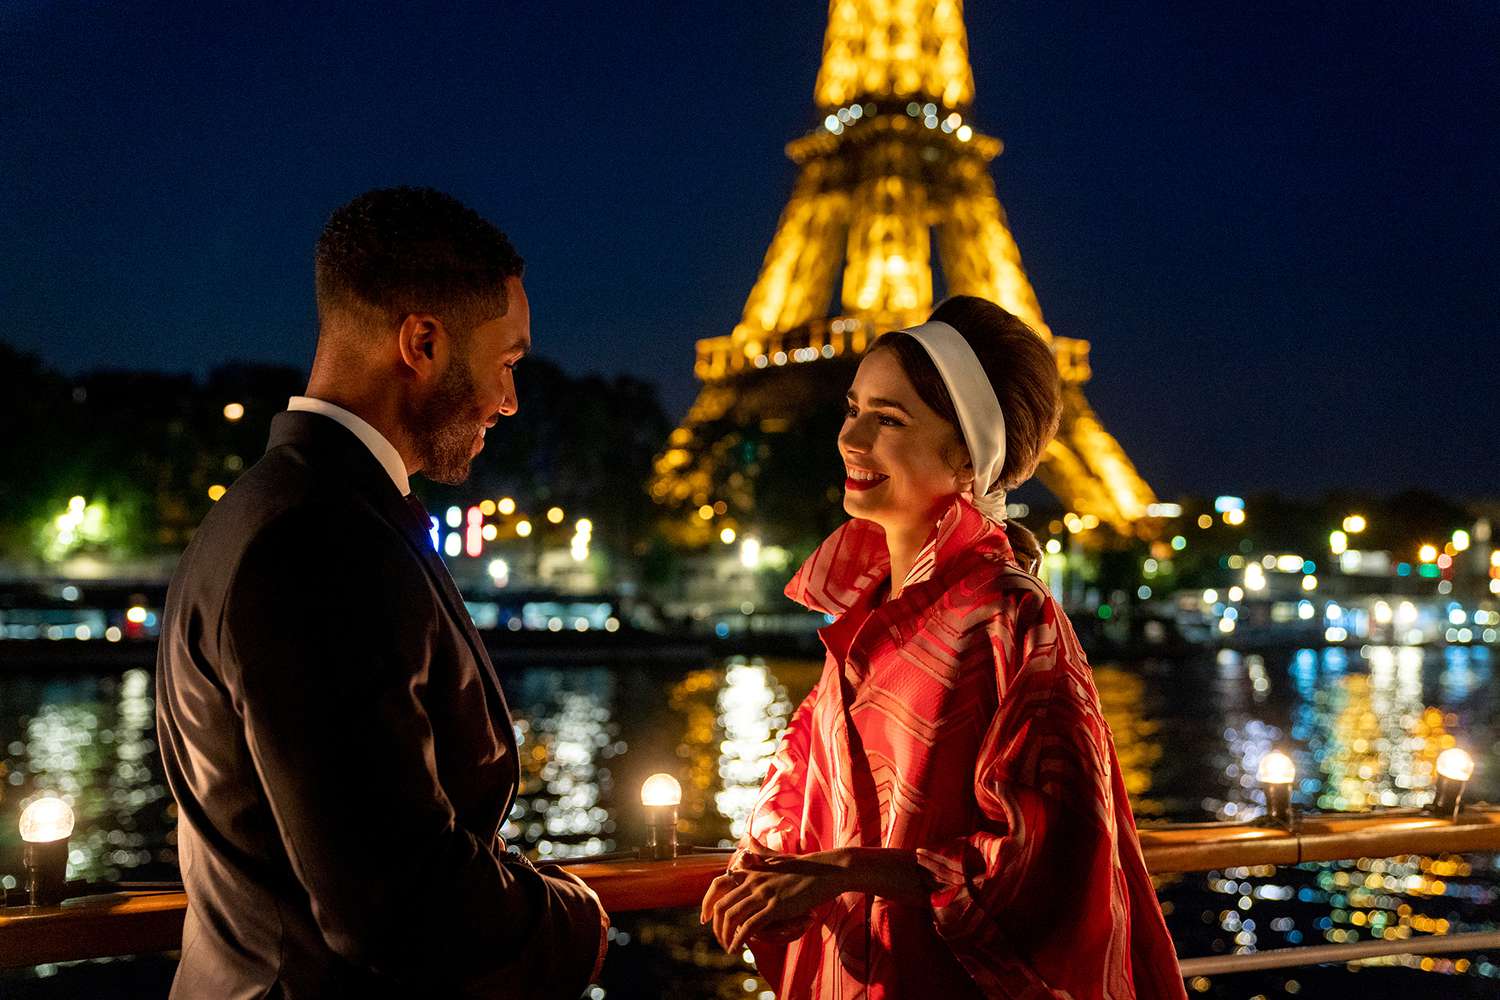 Emily in Paris. (L to R) Lucien Laviscount as Alfie, Lily Collins as Emily in episode 205 of Emily in Paris. Cr. Stéphanie Branchu/Netflix © 2021